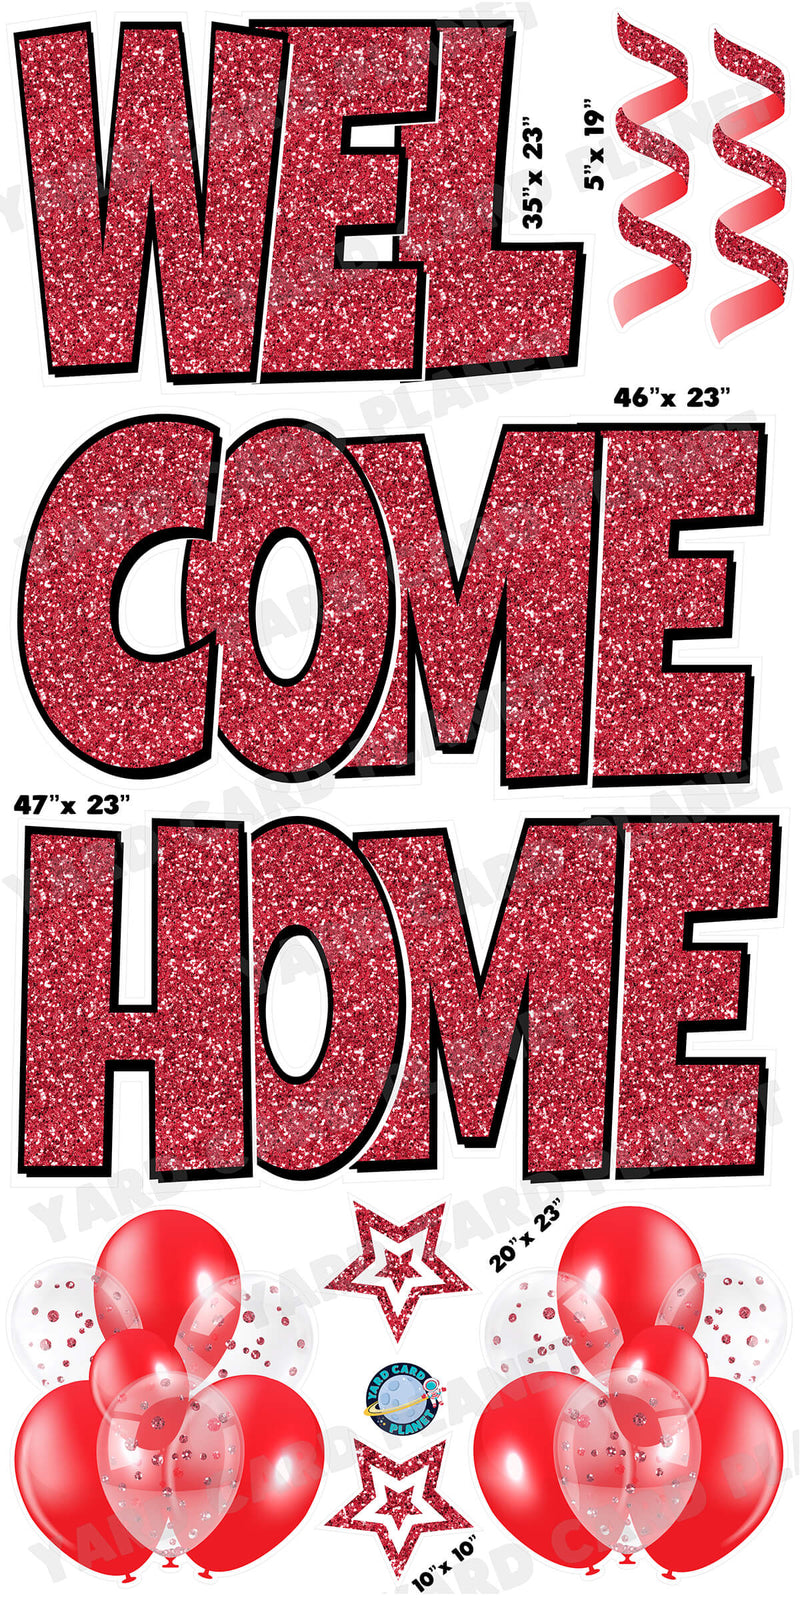 Large 23" Welcome Home Yard Card EZ Quick Sets in Luckiest Guy Font and Flair in Red Glitter Pattern